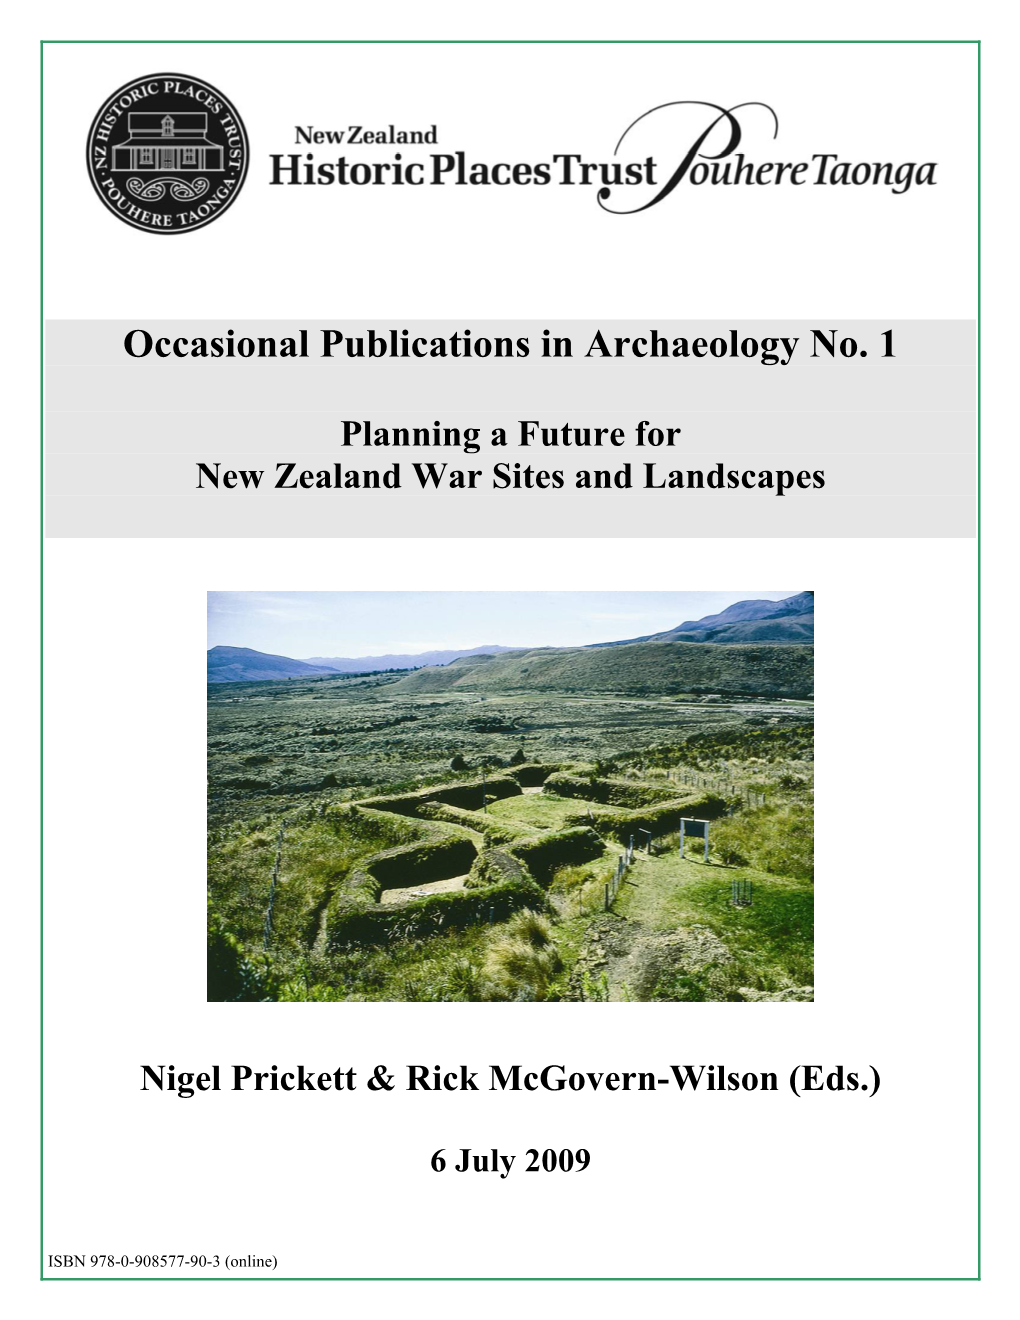 The Archaeology of the New Zealand Wars